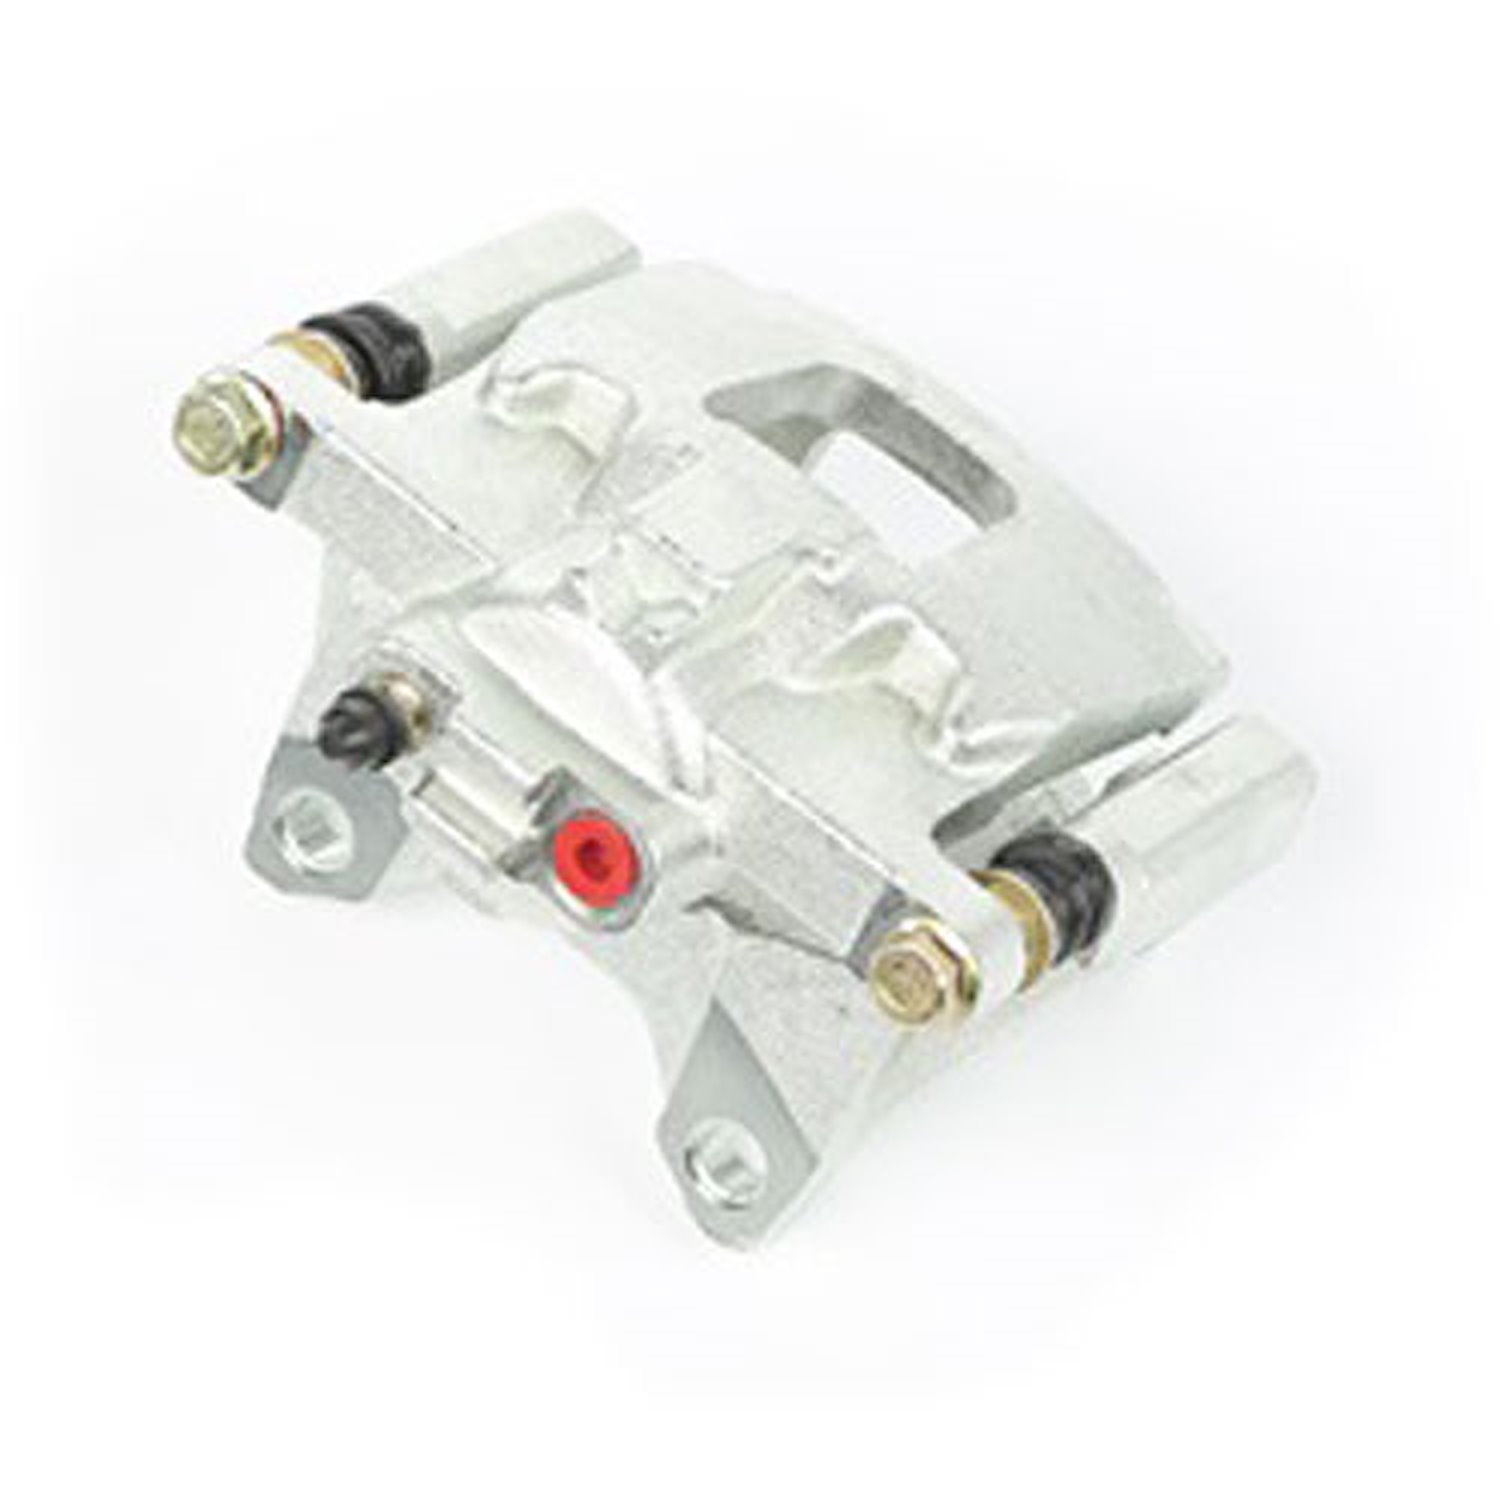 This rear disc brake caliper from Omix-ADA fits the right side on 07-13 Jeep Wranglers and the left side on 08-12 Libertys.